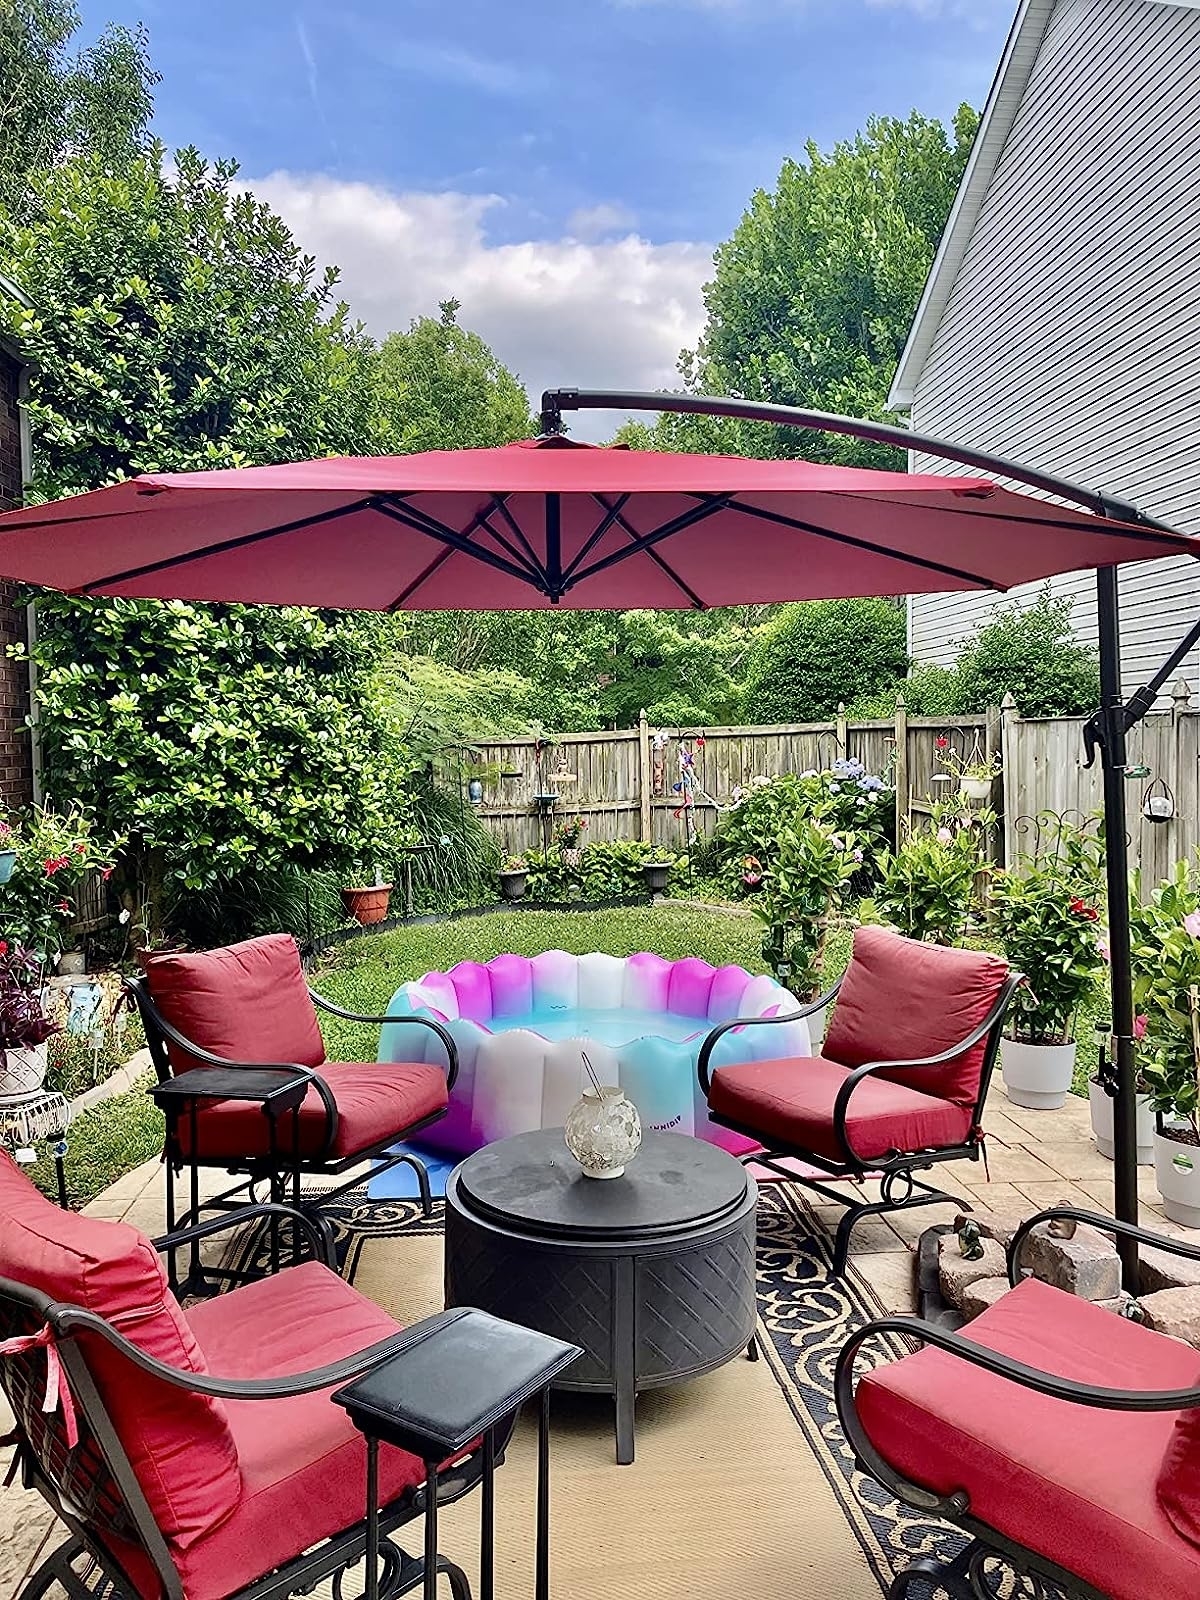 reviewer photo of the red umbrella providing shade for a small table and four chairs